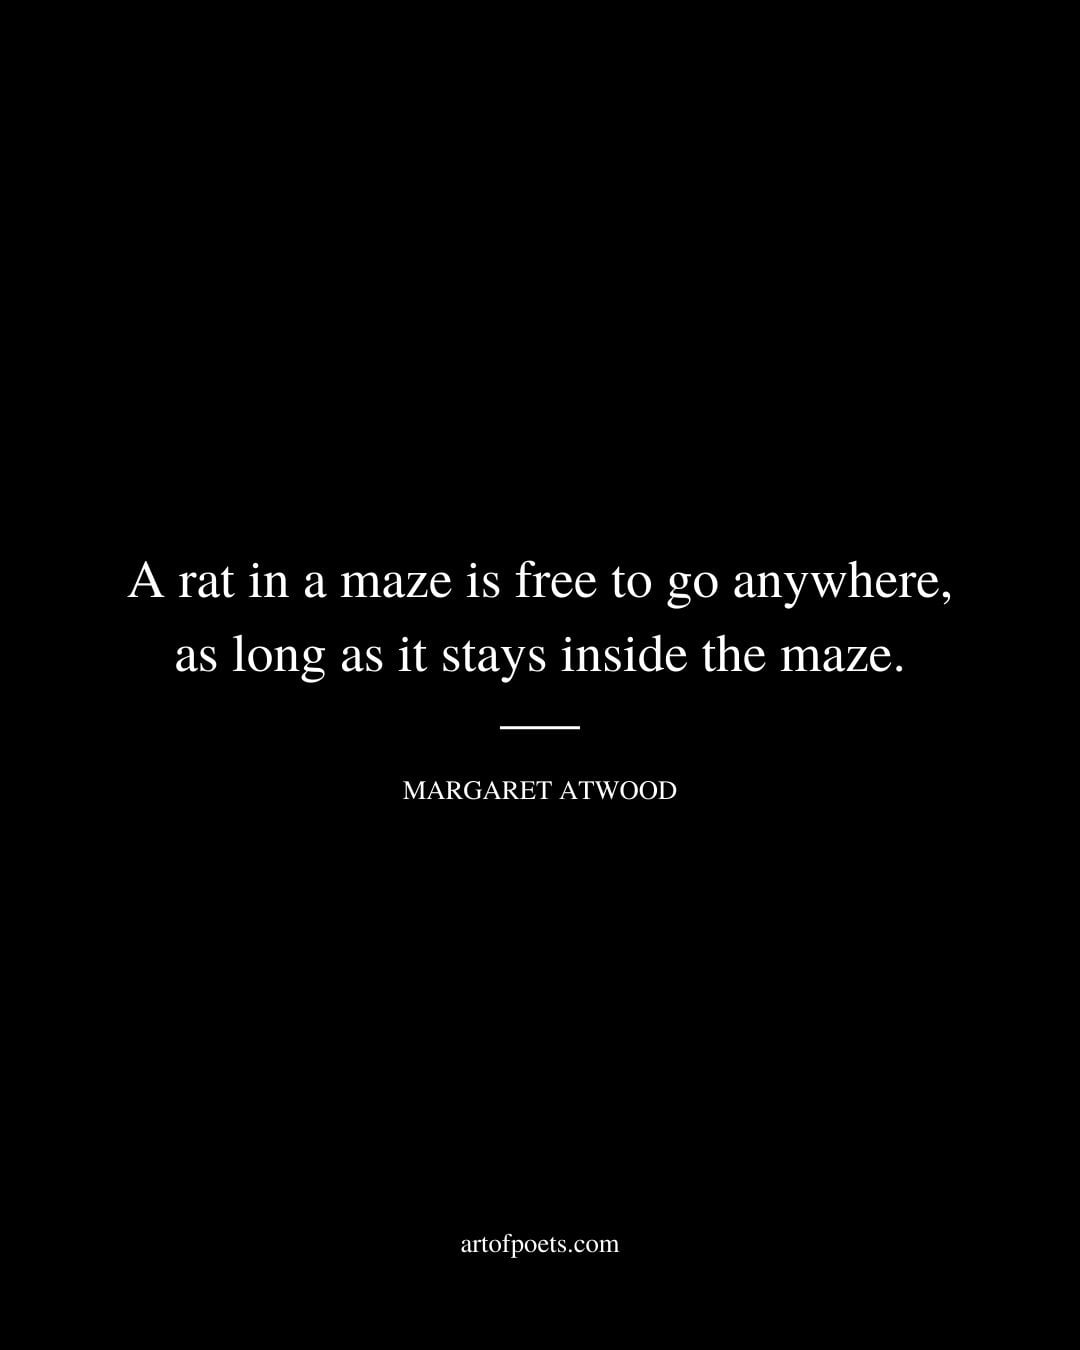 A rat in a maze is free to go anywhere as long as it stays inside the maze. Margaret Atwood